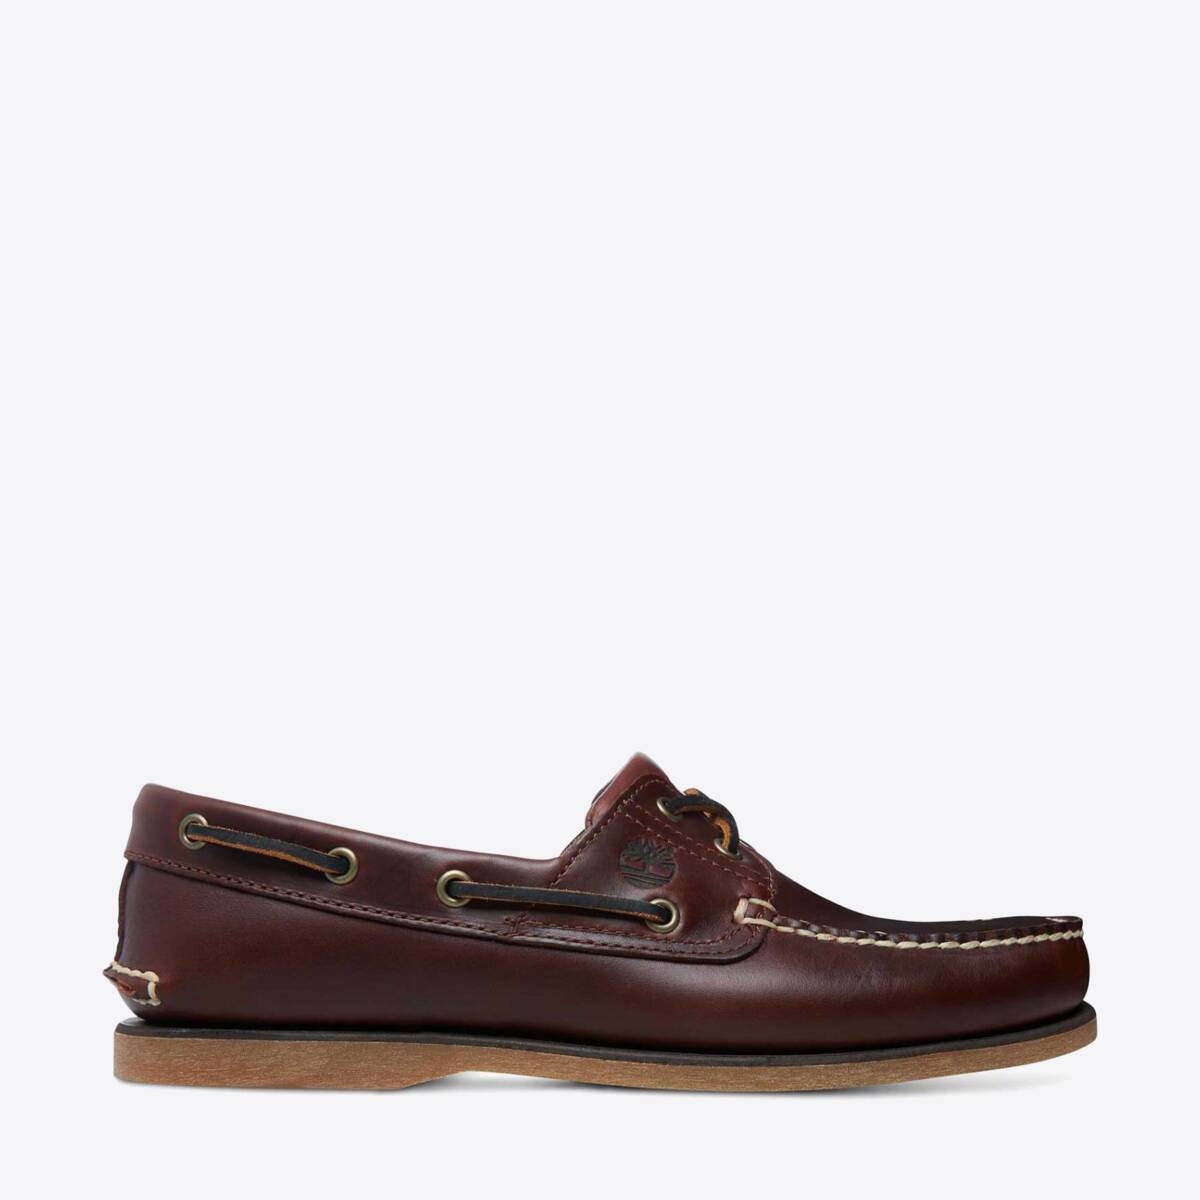 TIMBERLAND Classic 2-Eye Boat Shoes Rootbeer - Image 2